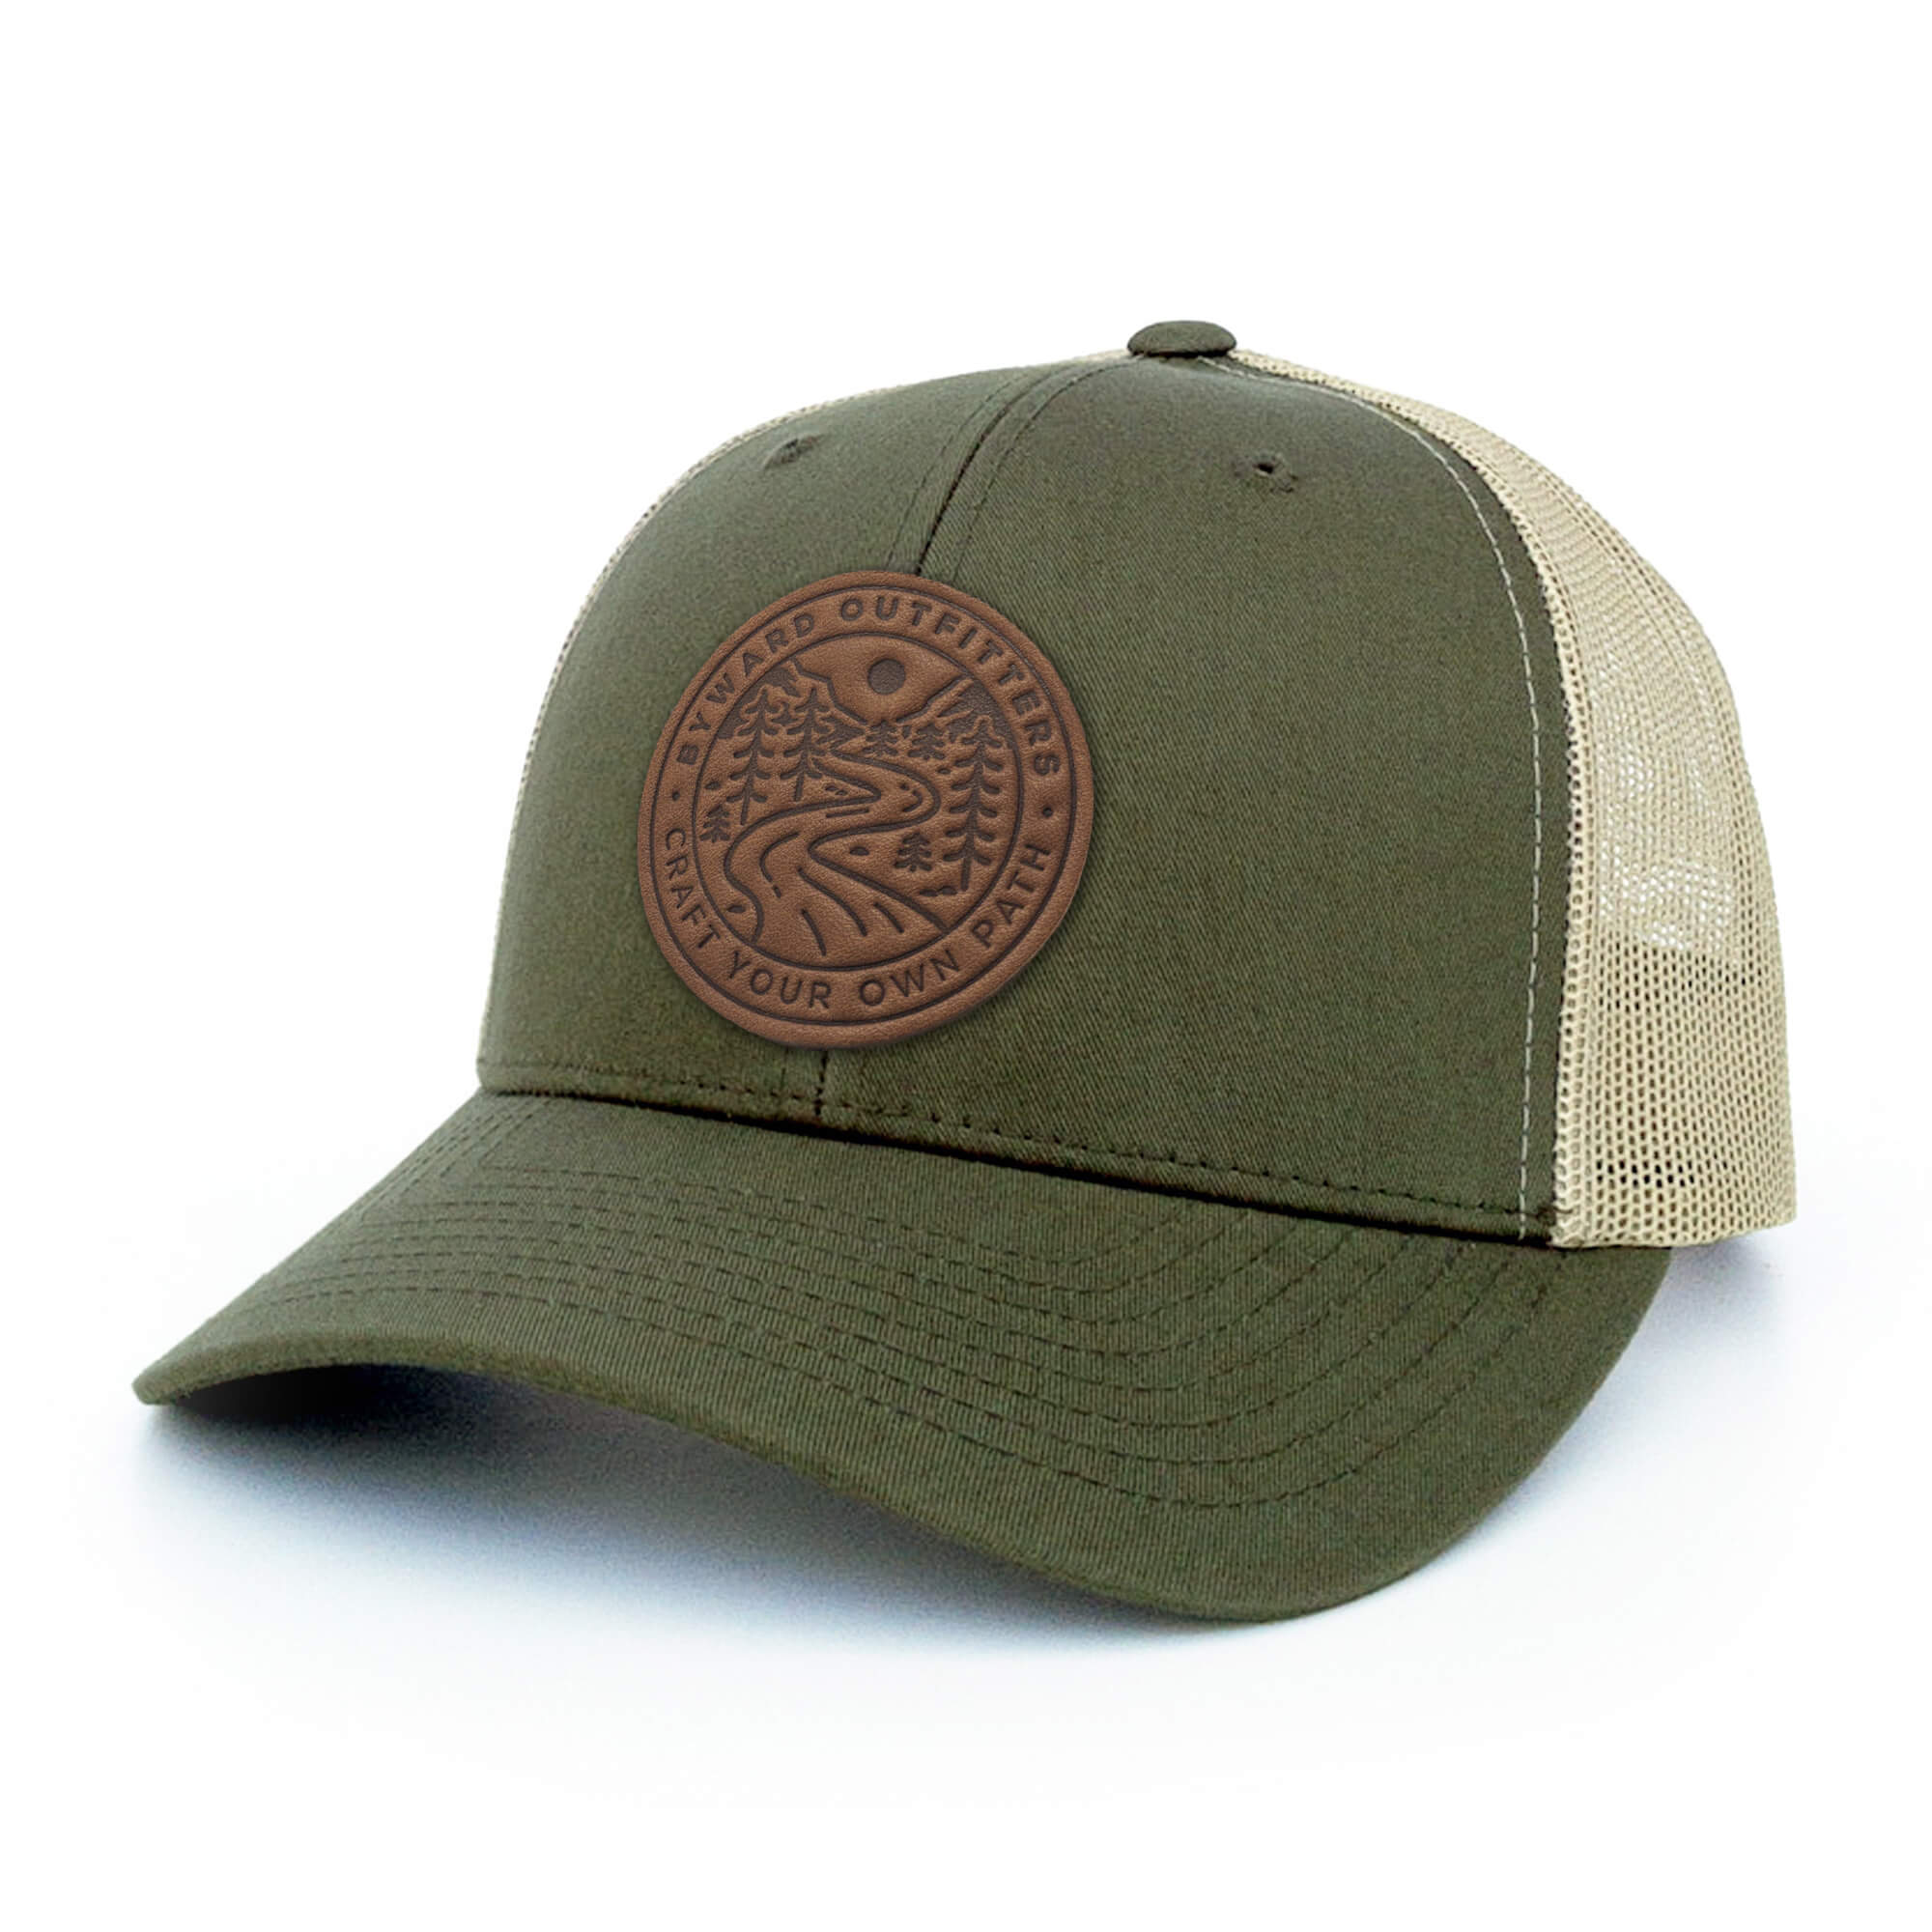 Moss Green and khaki trucker hat with full-grain leather patch of Winding Wilderness | BLACK-005-004, CHARC-005-004, NAVY-005-004, HGREY-005-004, MOSS-005-004, BROWN-005-004